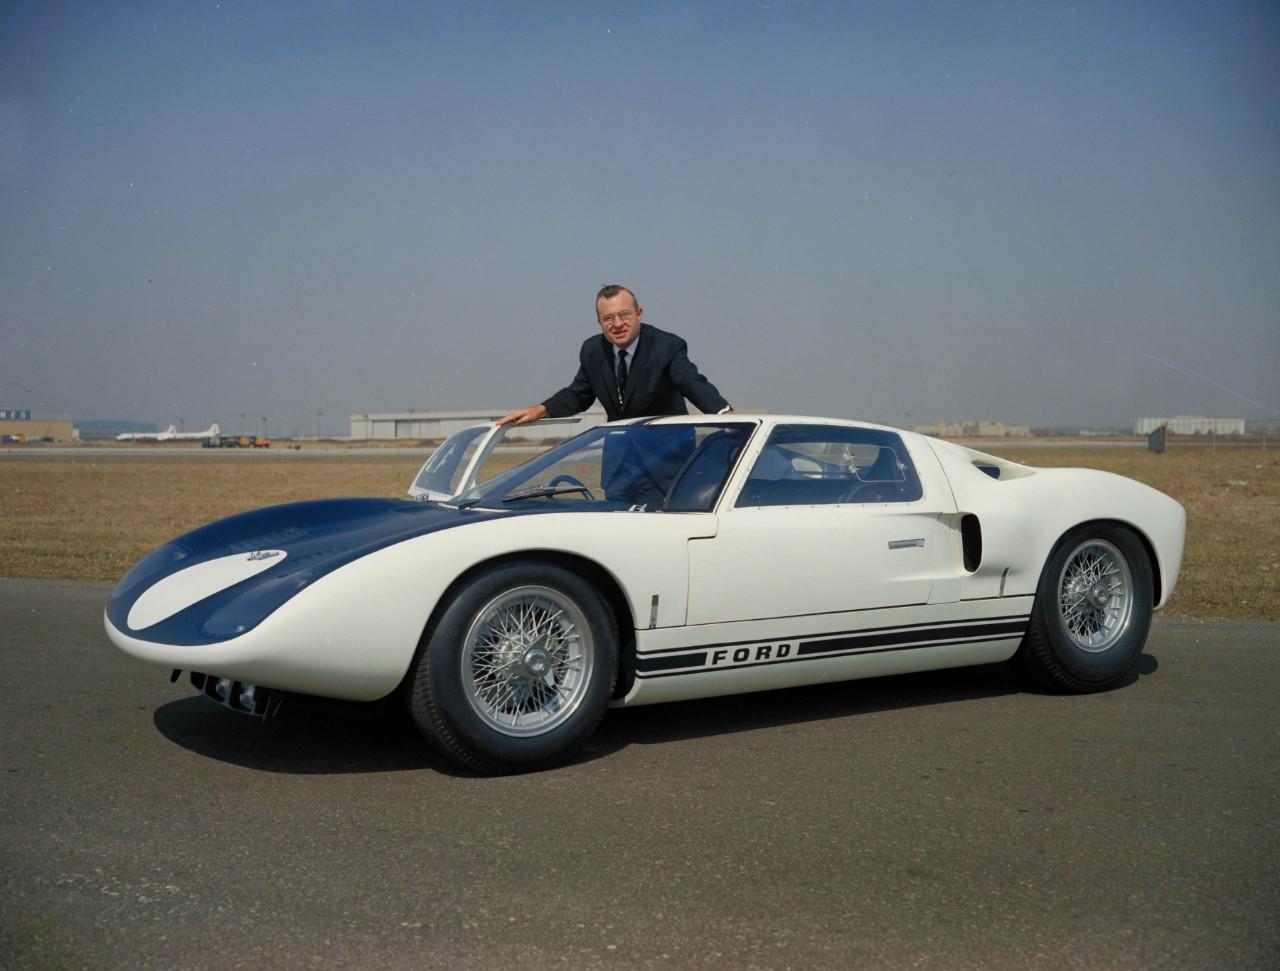 Why has Ford abandoned the GT40 name?